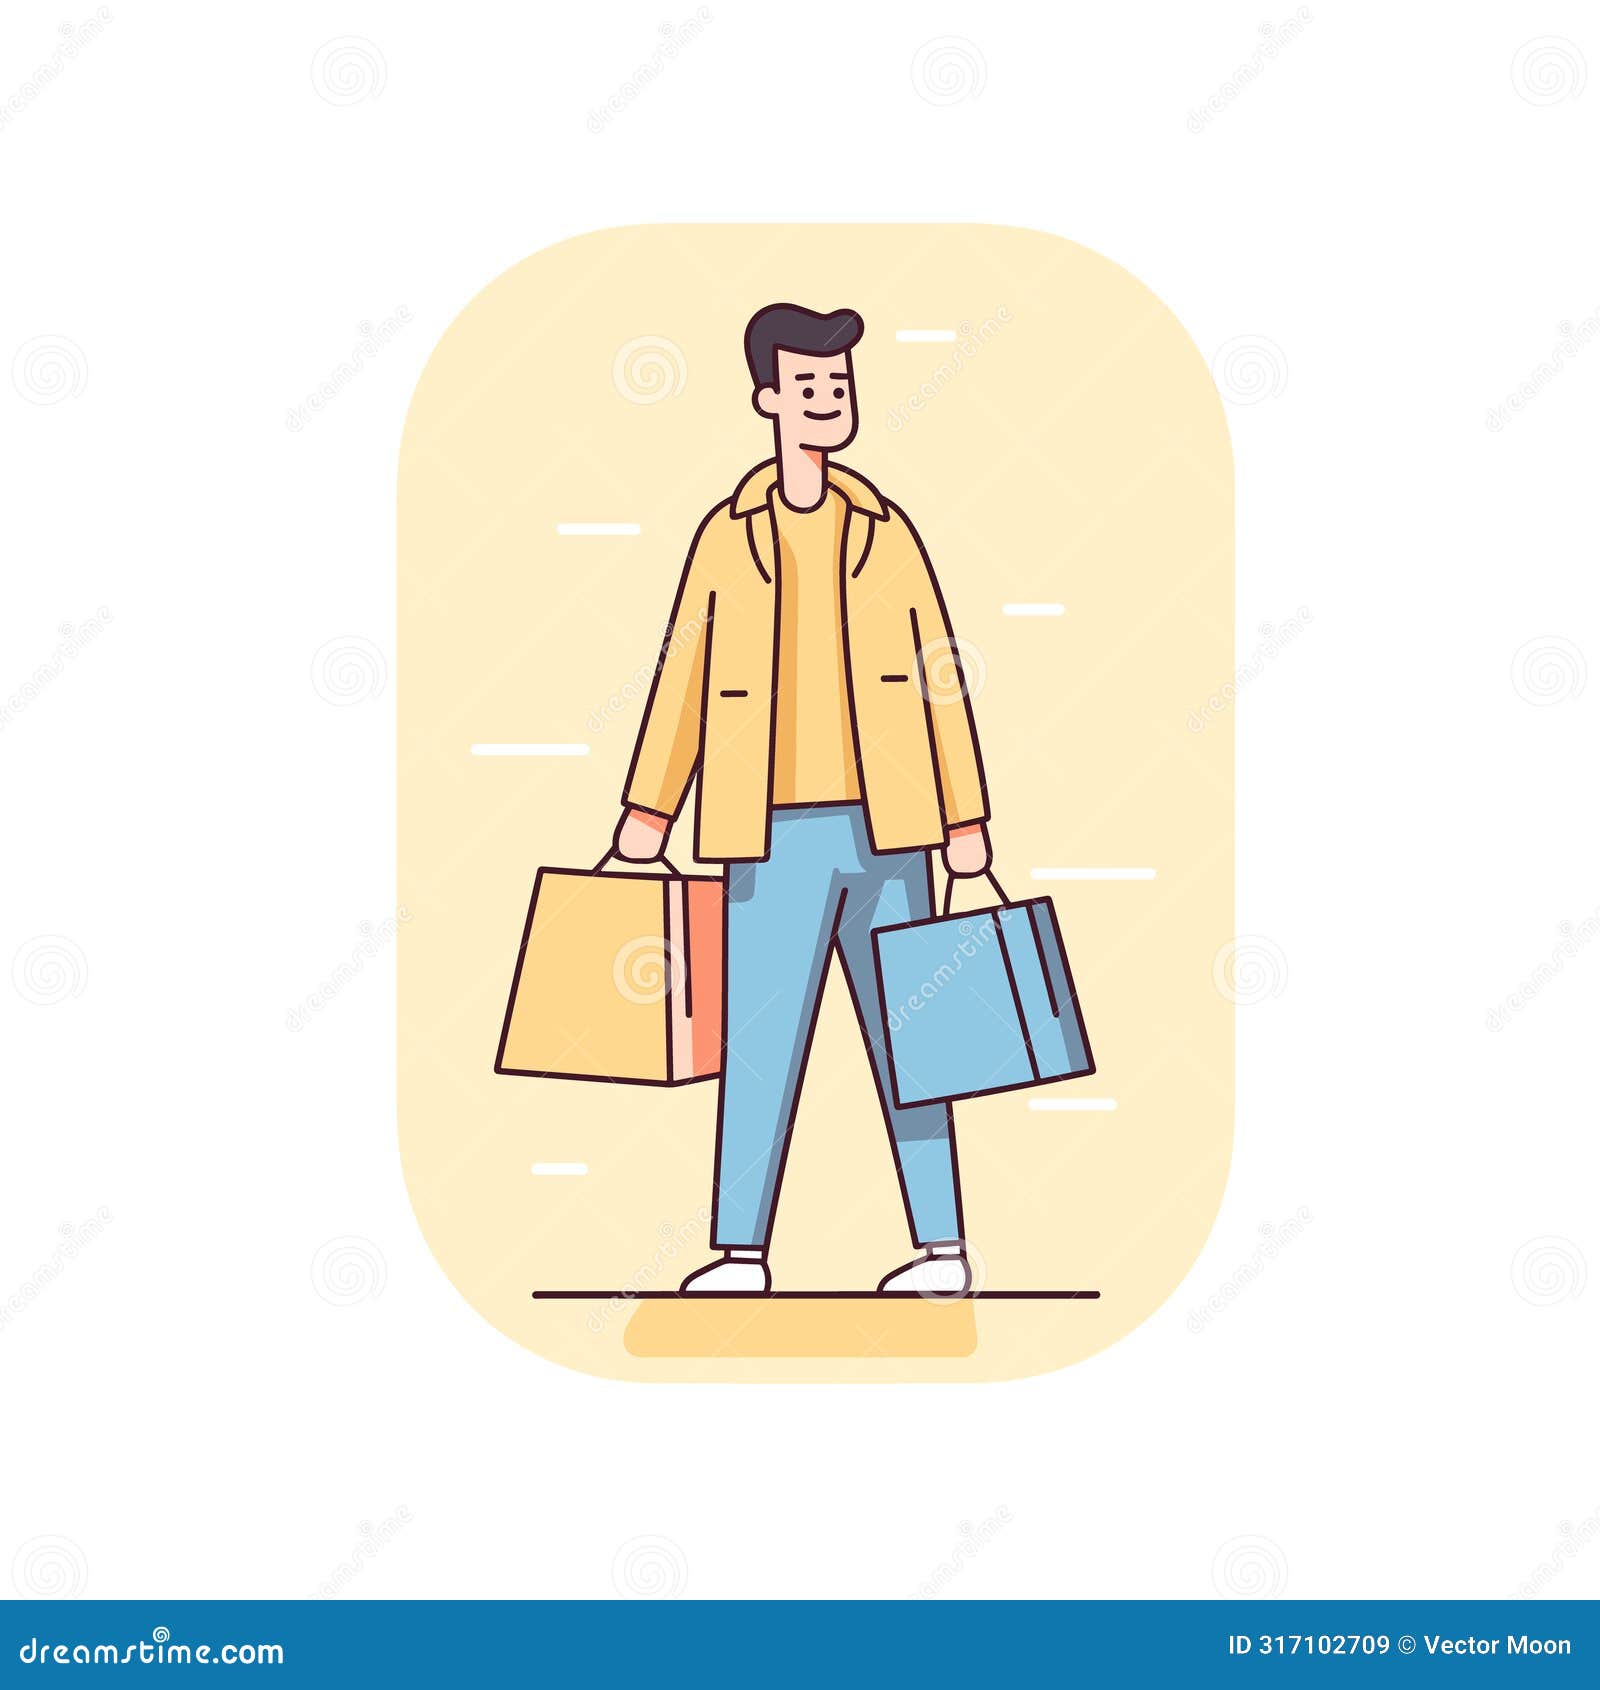 young man happy shopping carrying bags. smiling shopper purchases walking confidently. casual male